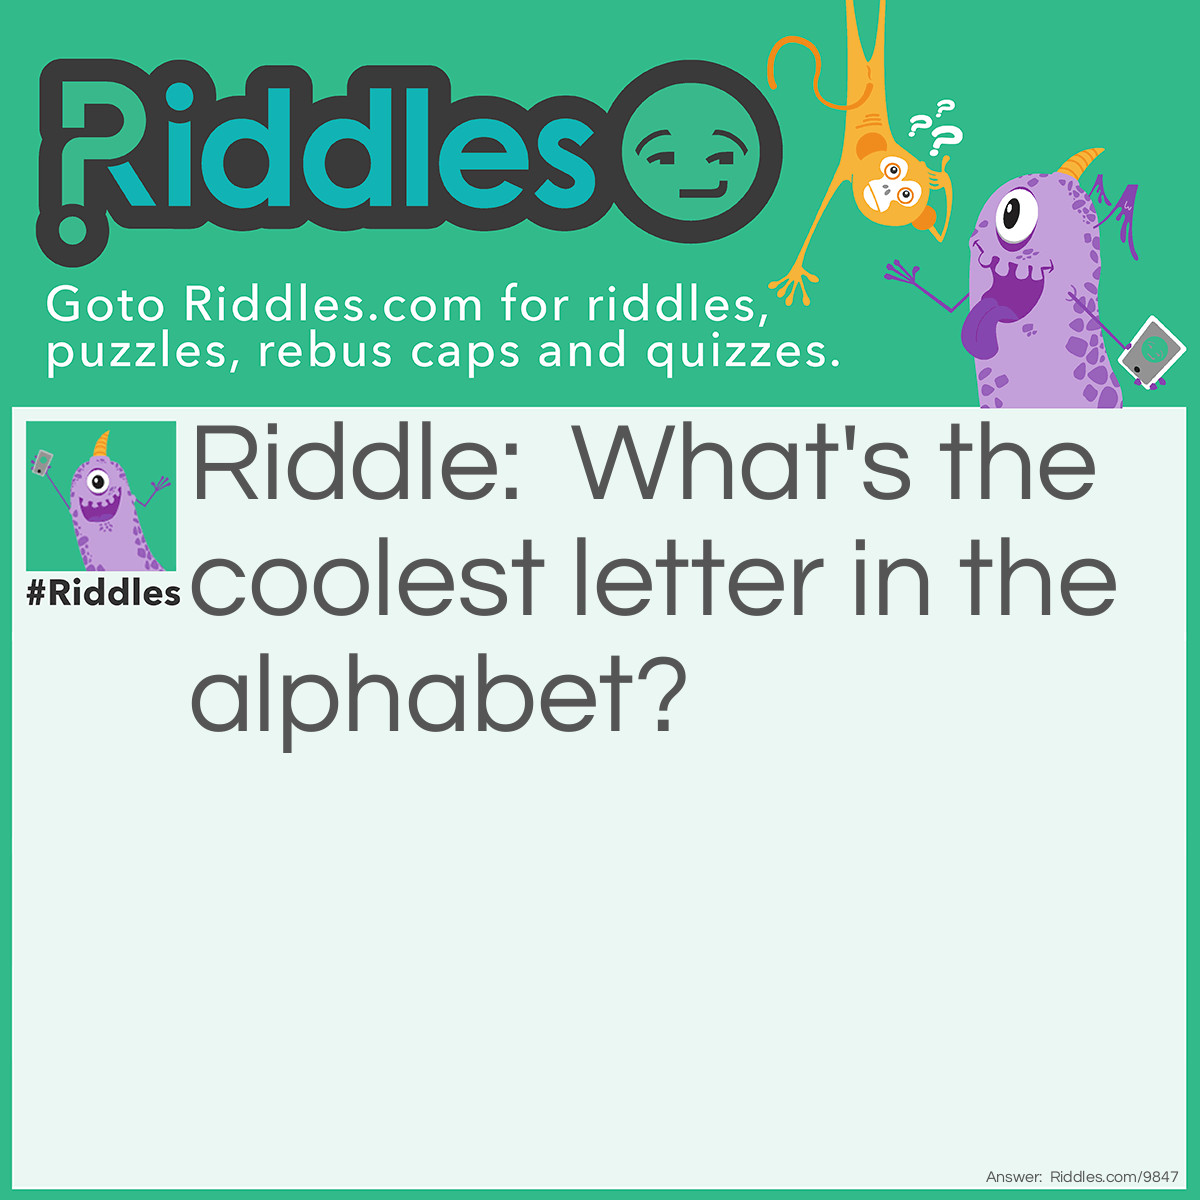 Riddle: What's the coolest letter in the alphabet? Answer: The letter B. It's surrounded by AC.